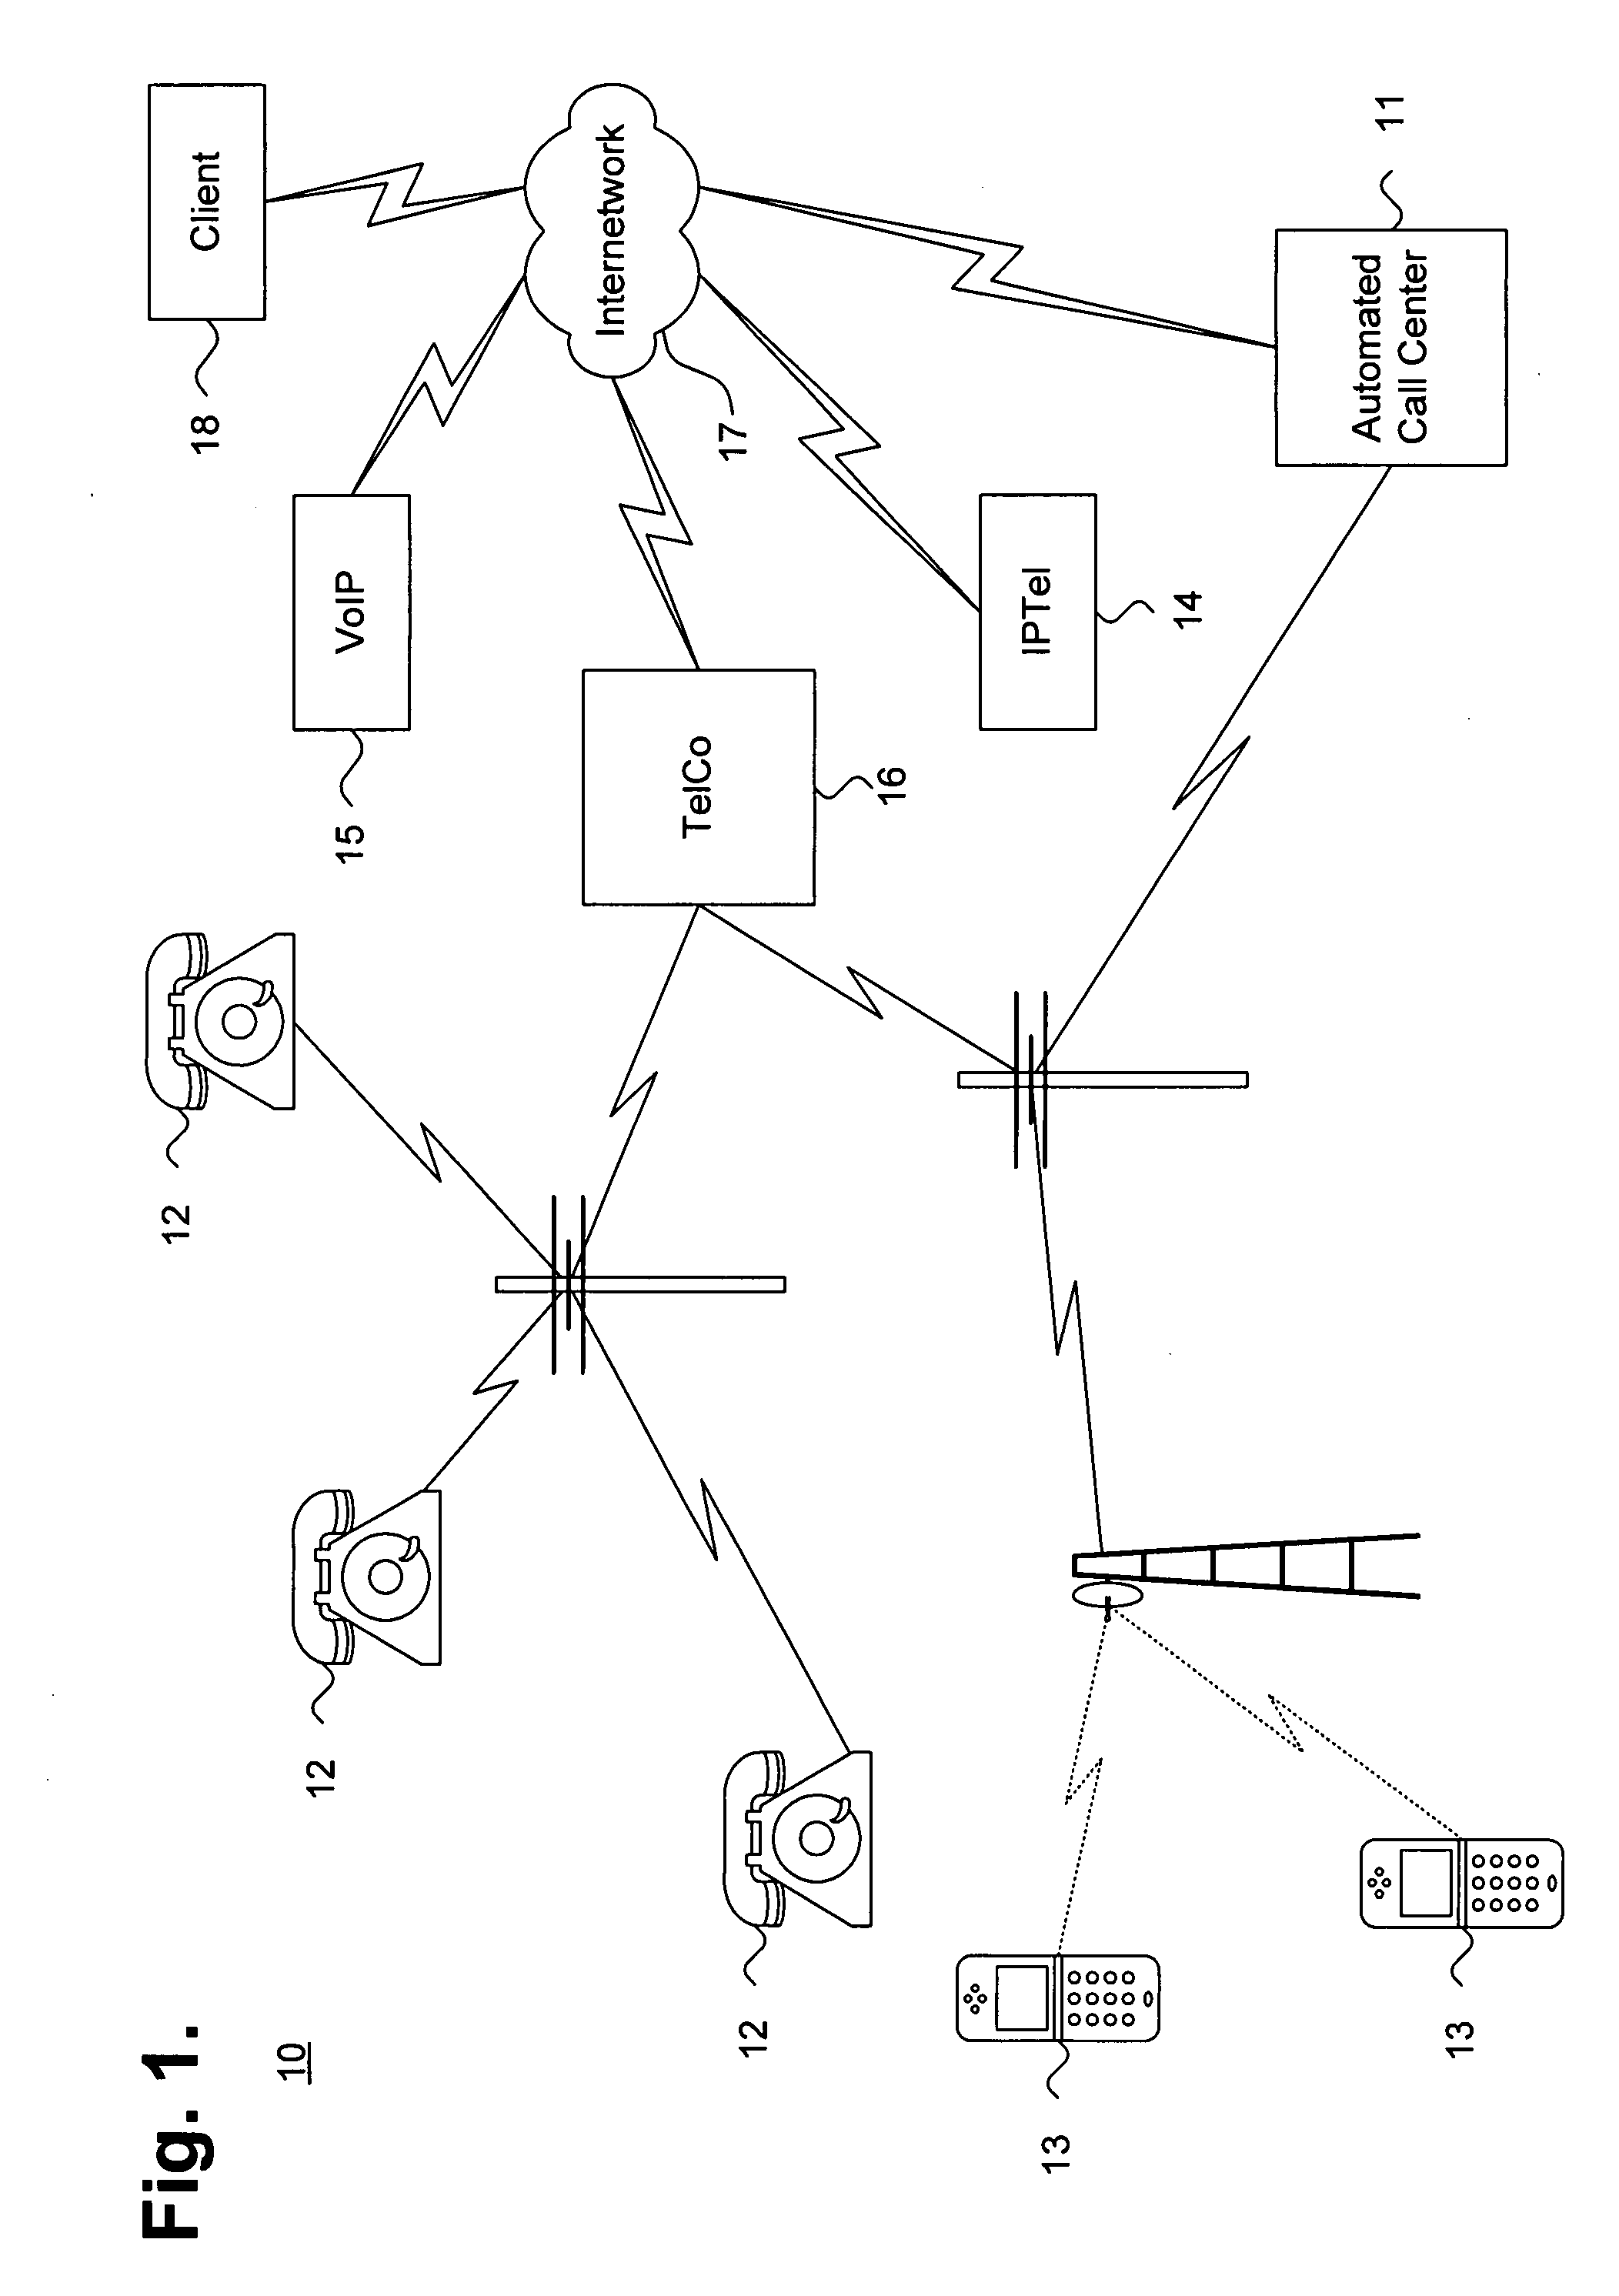 System and method for monitoring an interaction between a caller and an automated voice response system